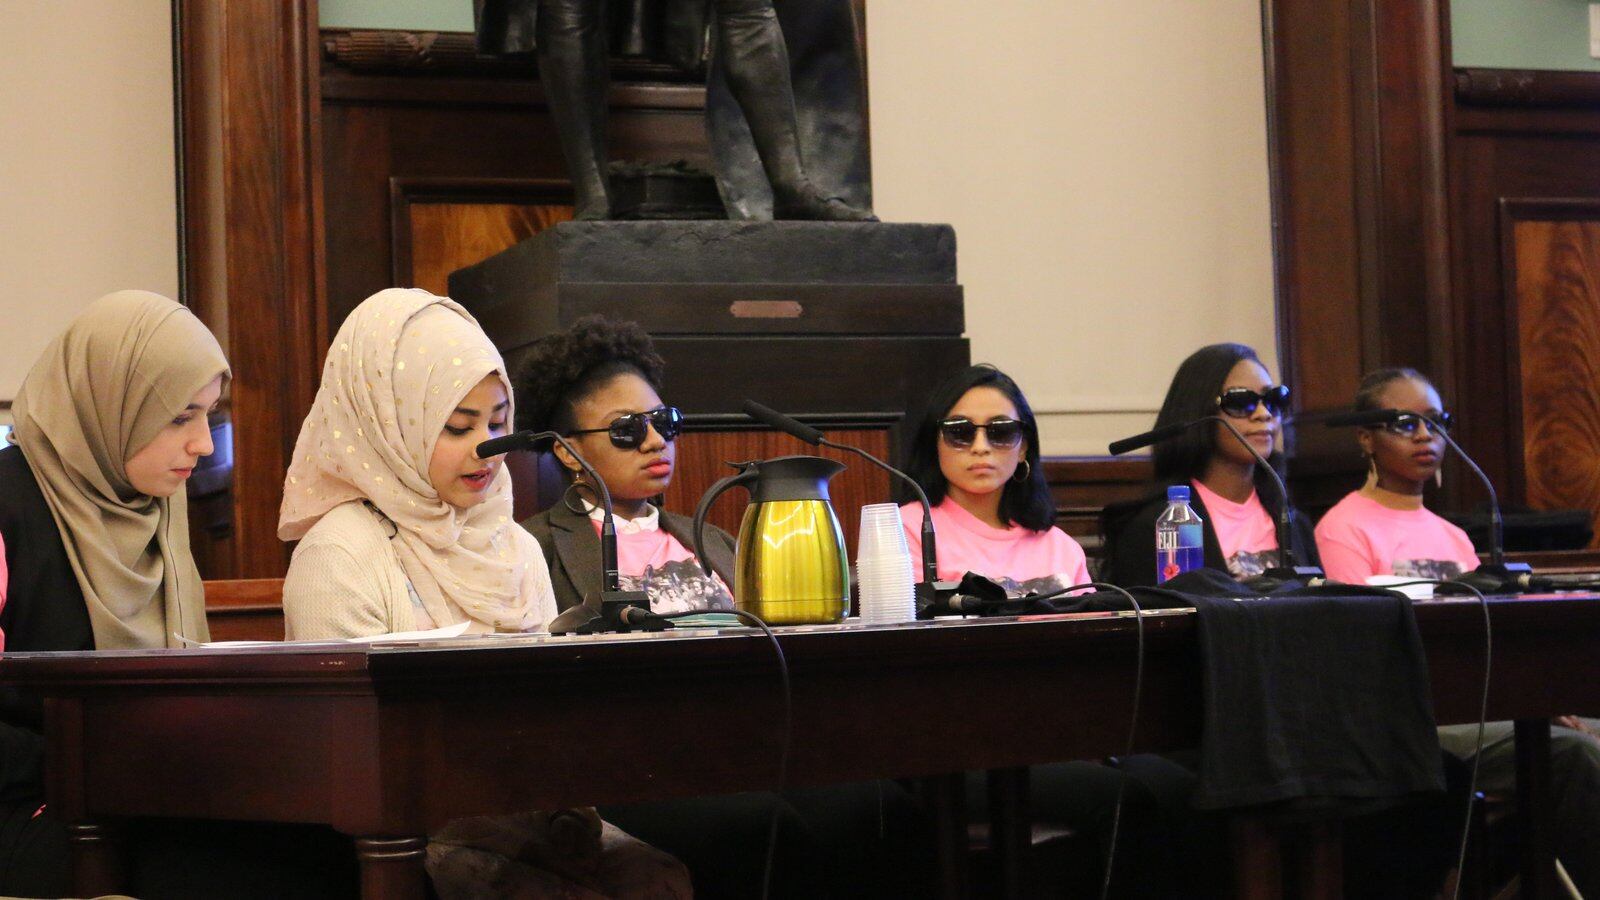 Students from IntegrateNYC testified at a City Council education committee hearing. The group is made of students pushing for school integration.